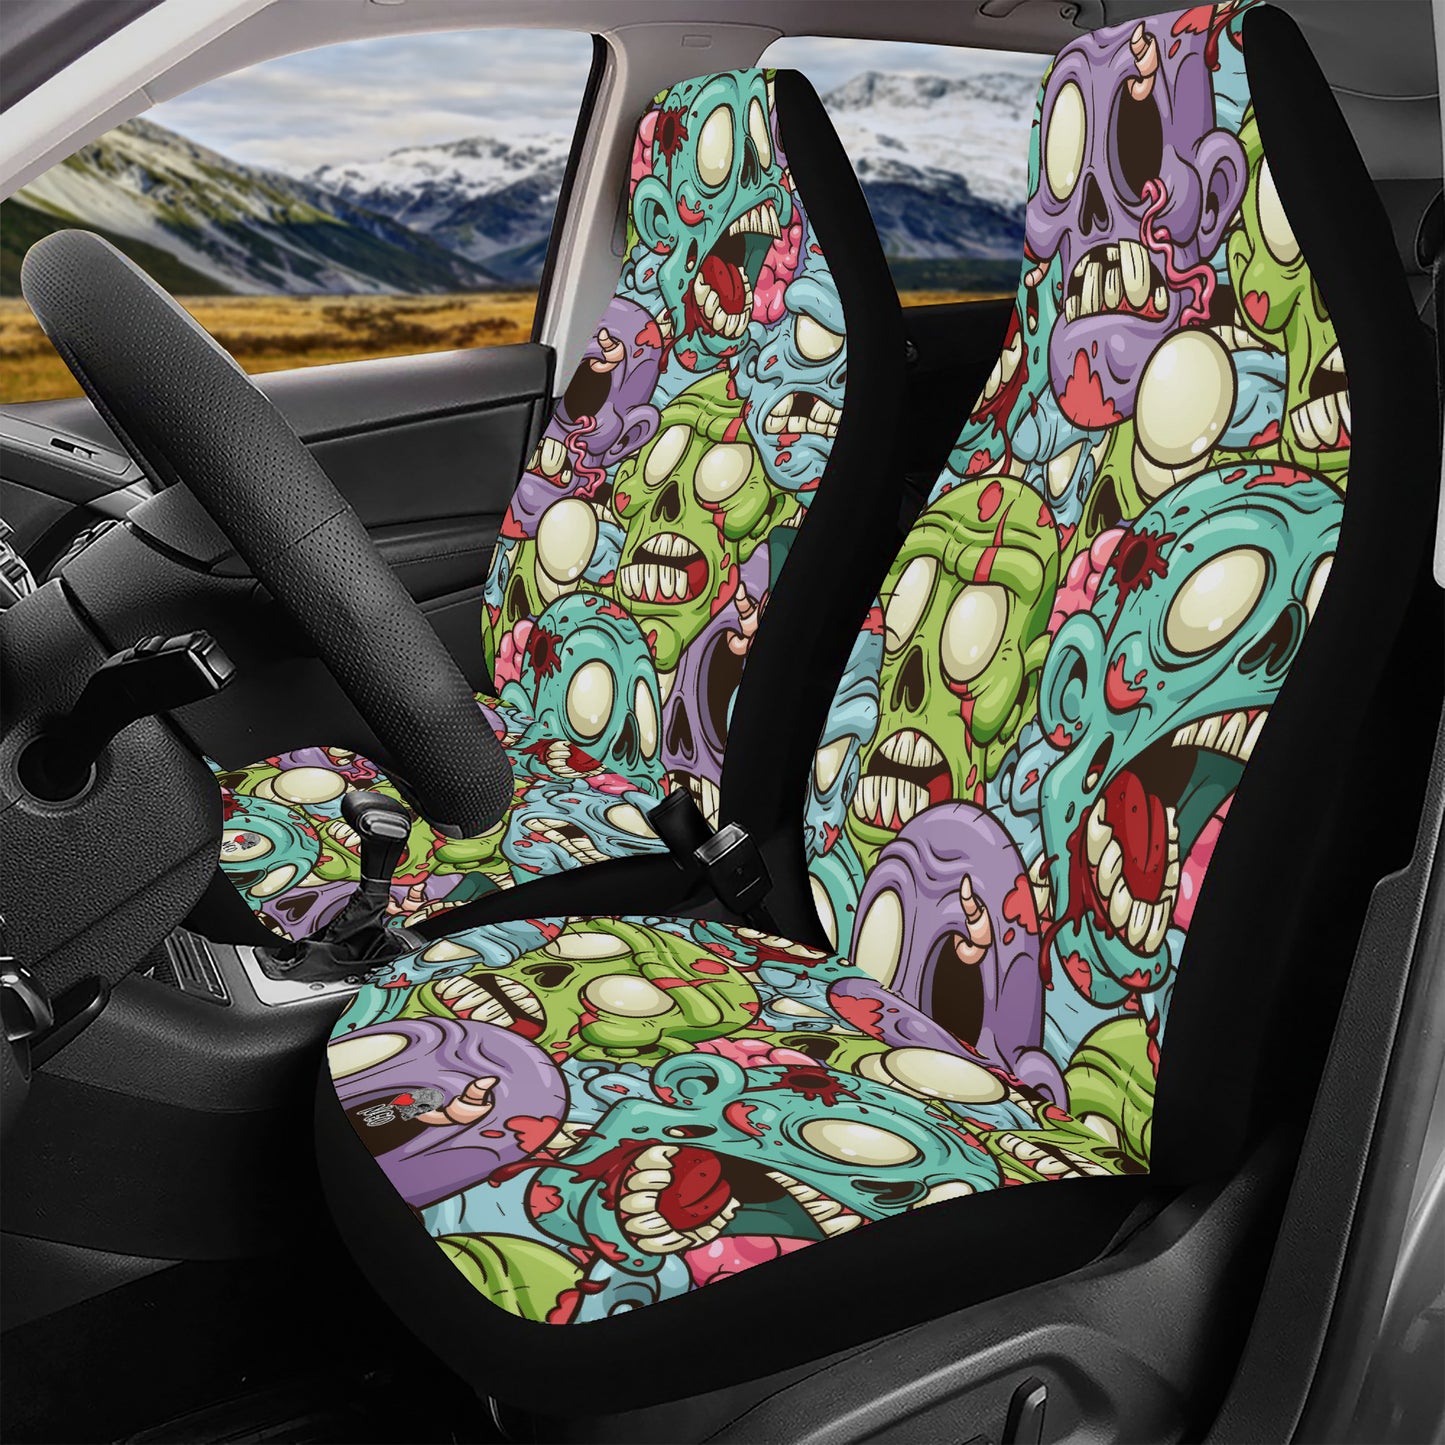 Zombie Crowd full Car Seat Cover Set